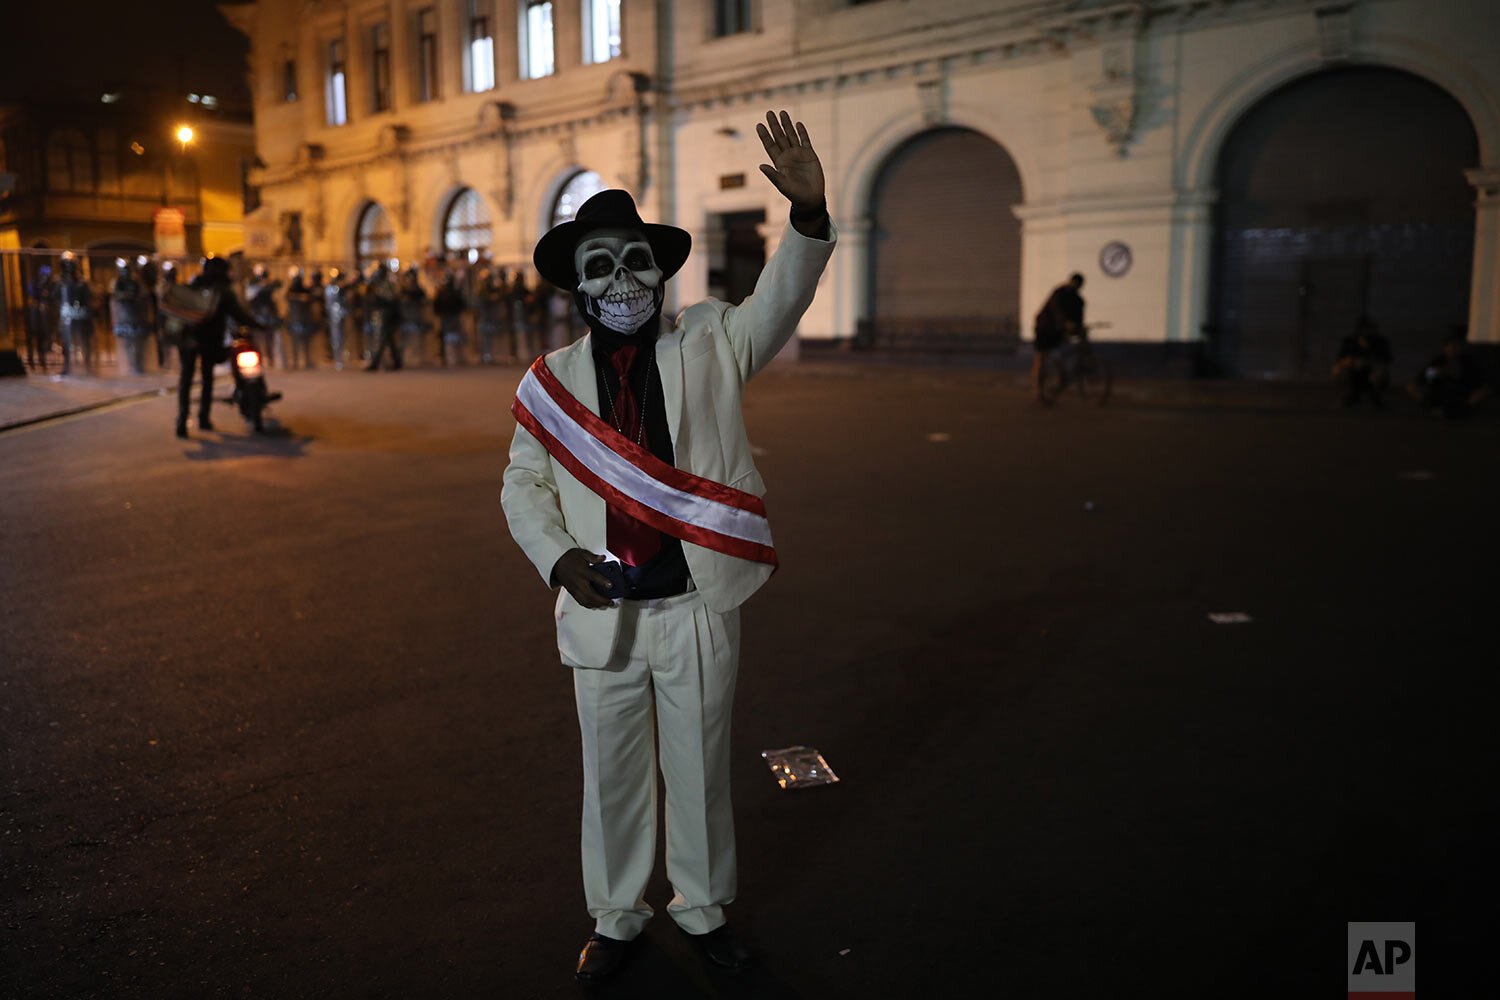  A man dressed as Peru's newly sworn-in president and wearing a mask symbolizing death waves during a protest against the removal of President Martin Vizcarra, in Plaza San Martin in Lima, Peru, Thursday, Nov. 12, 2020. (AP Photo/Rodrigo Abd) 